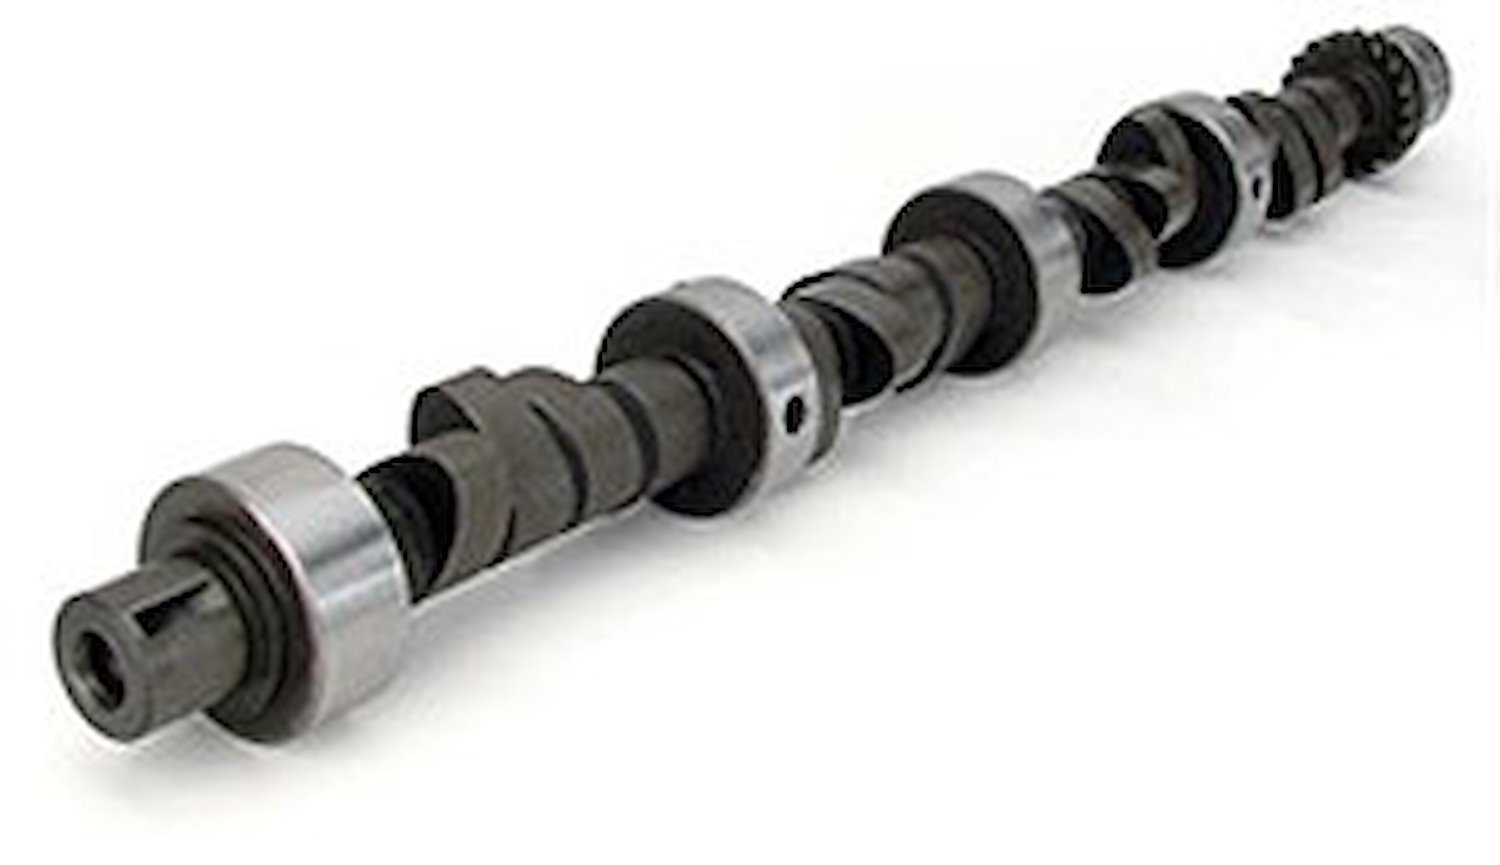 Xtreme Energy 274H Hydraulic Flat Tappet Camshaft Only Lift .488"/.491" Duration 274°/286° RPM Range 1800-6000